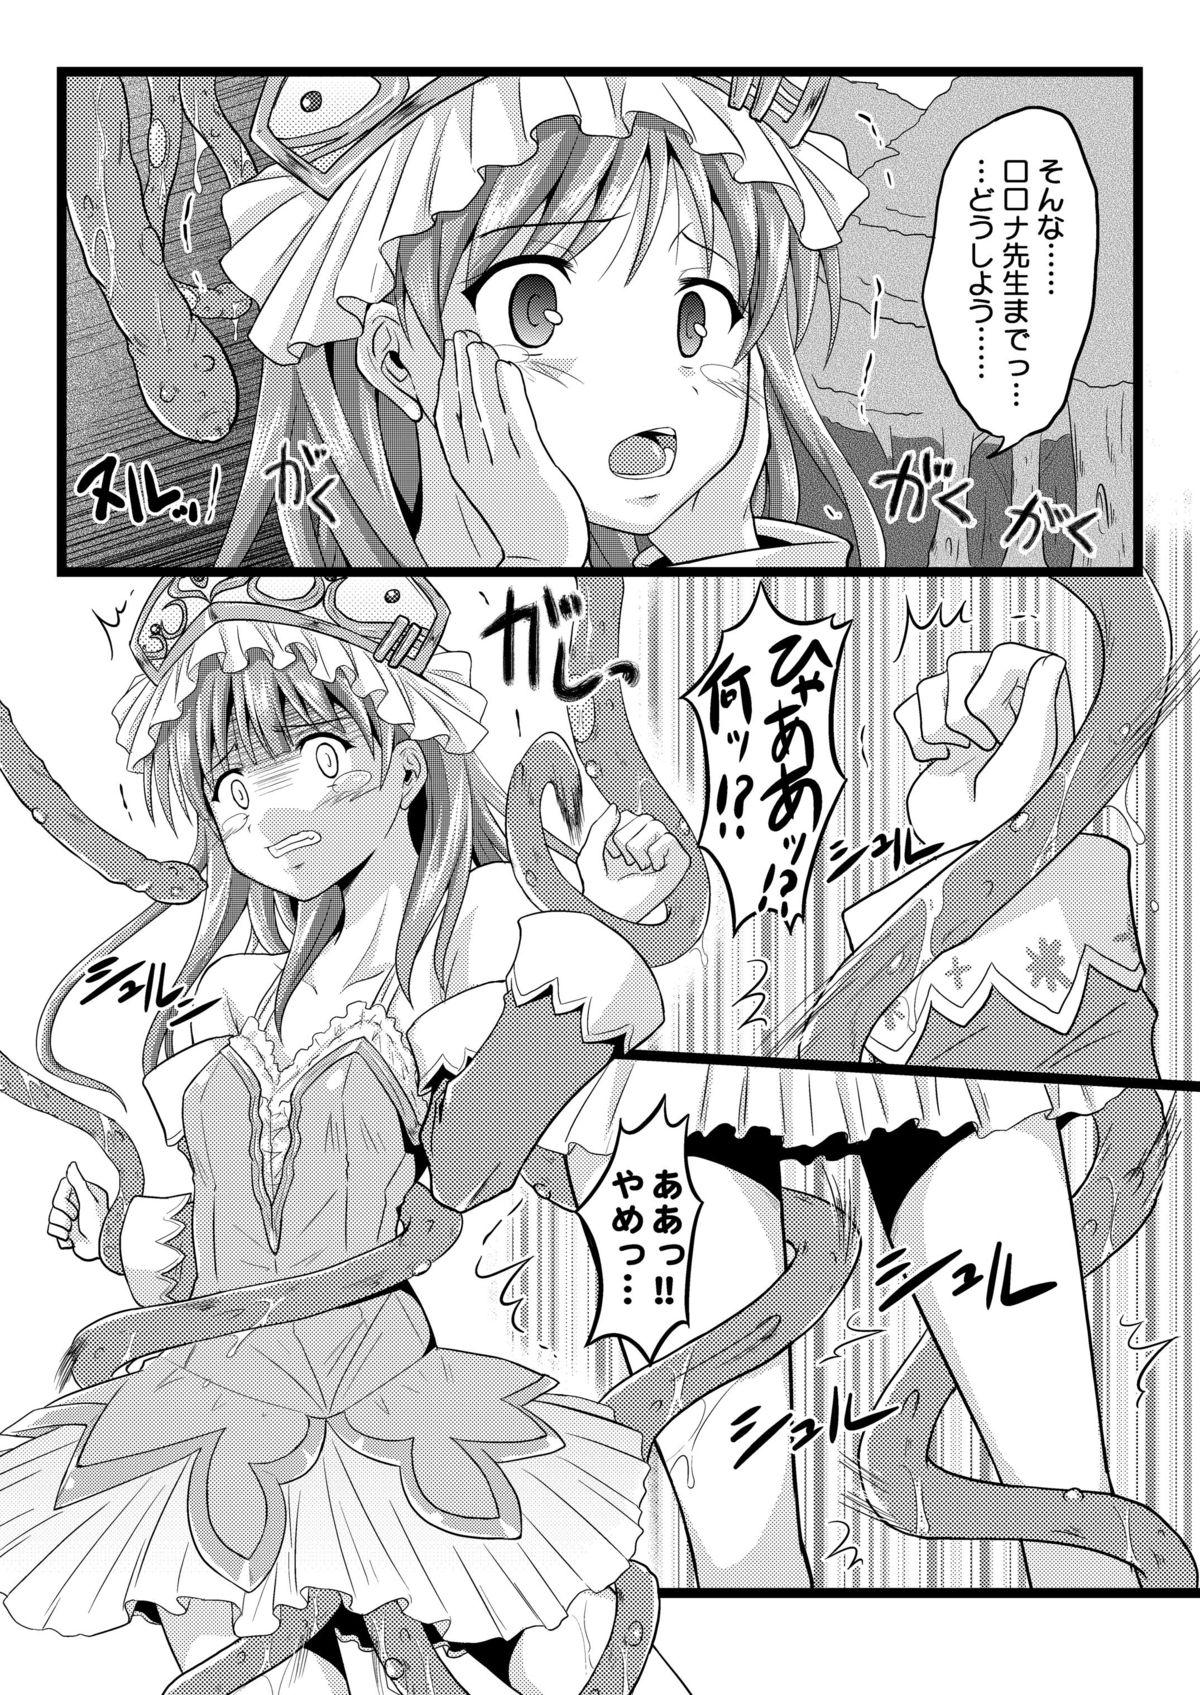 Fishnet N/A Engine - Atelier totori Whipping - Page 13